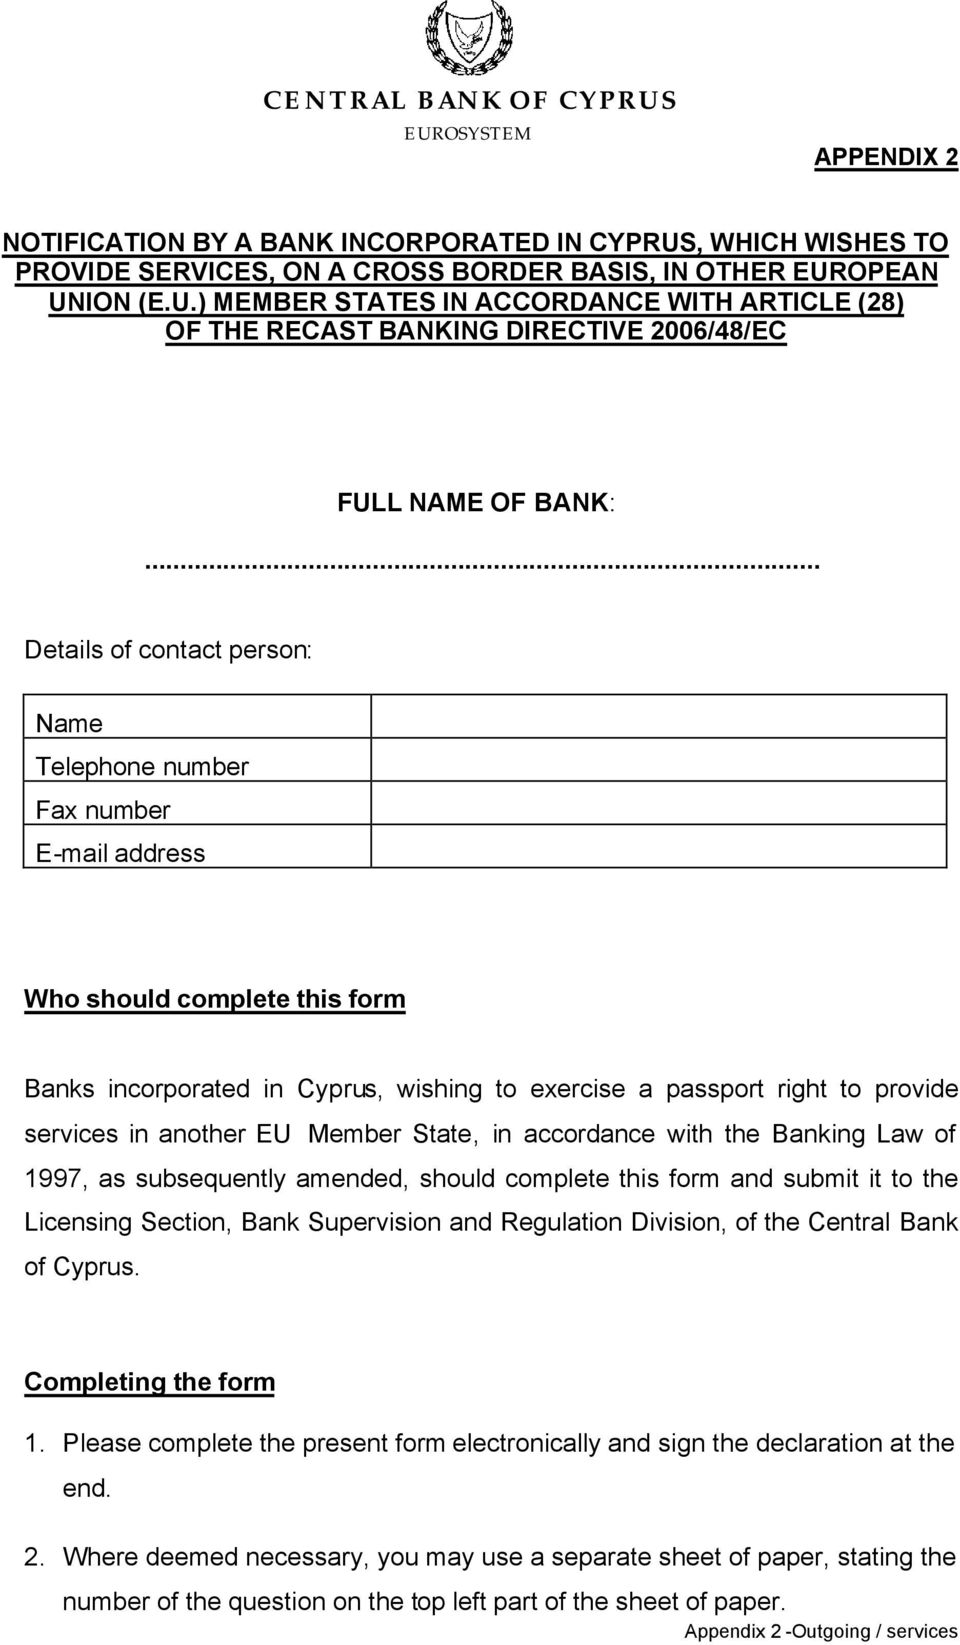 another EU Member State, in accordance with the Banking Law of 1997, as subsequently amended, should complete this form and submit it to the Licensing Section, Bank Supervision and Regulation